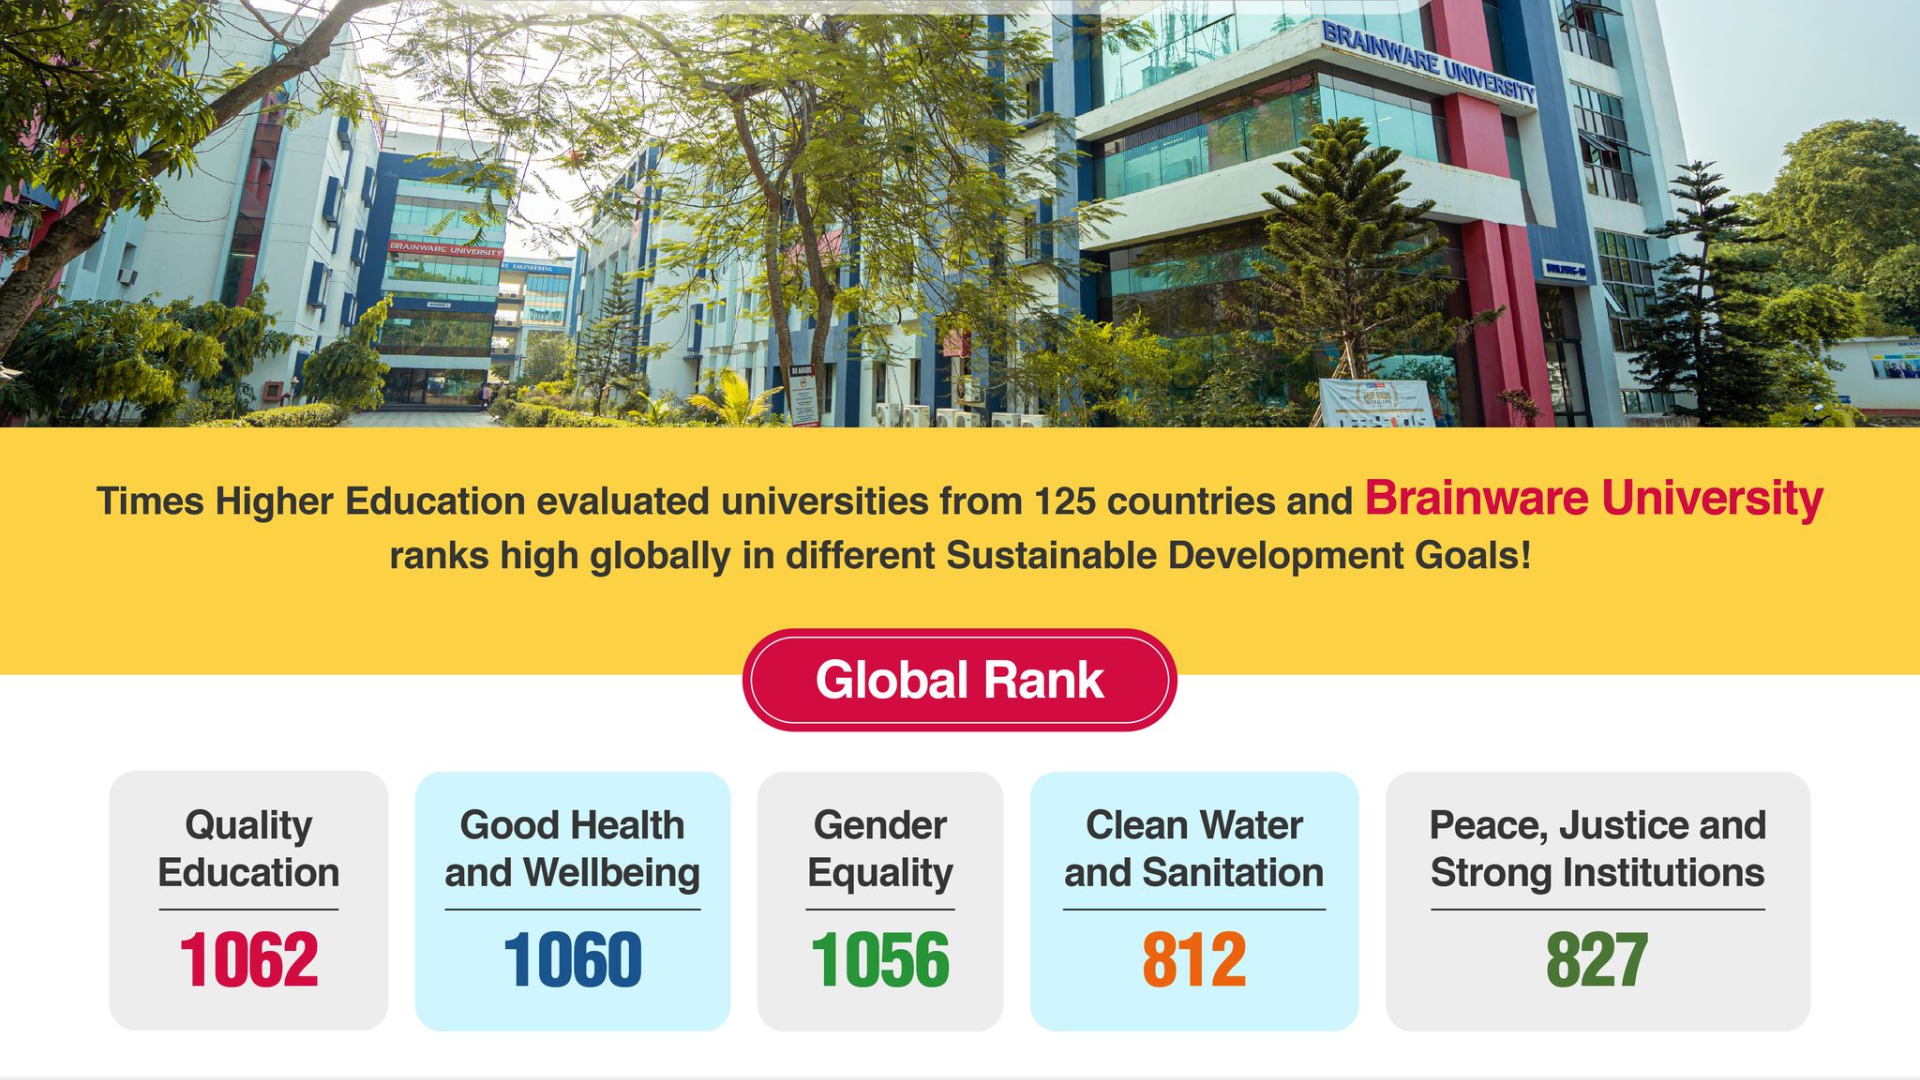 Brainware University features as the only West Bengal University in Times Rankings